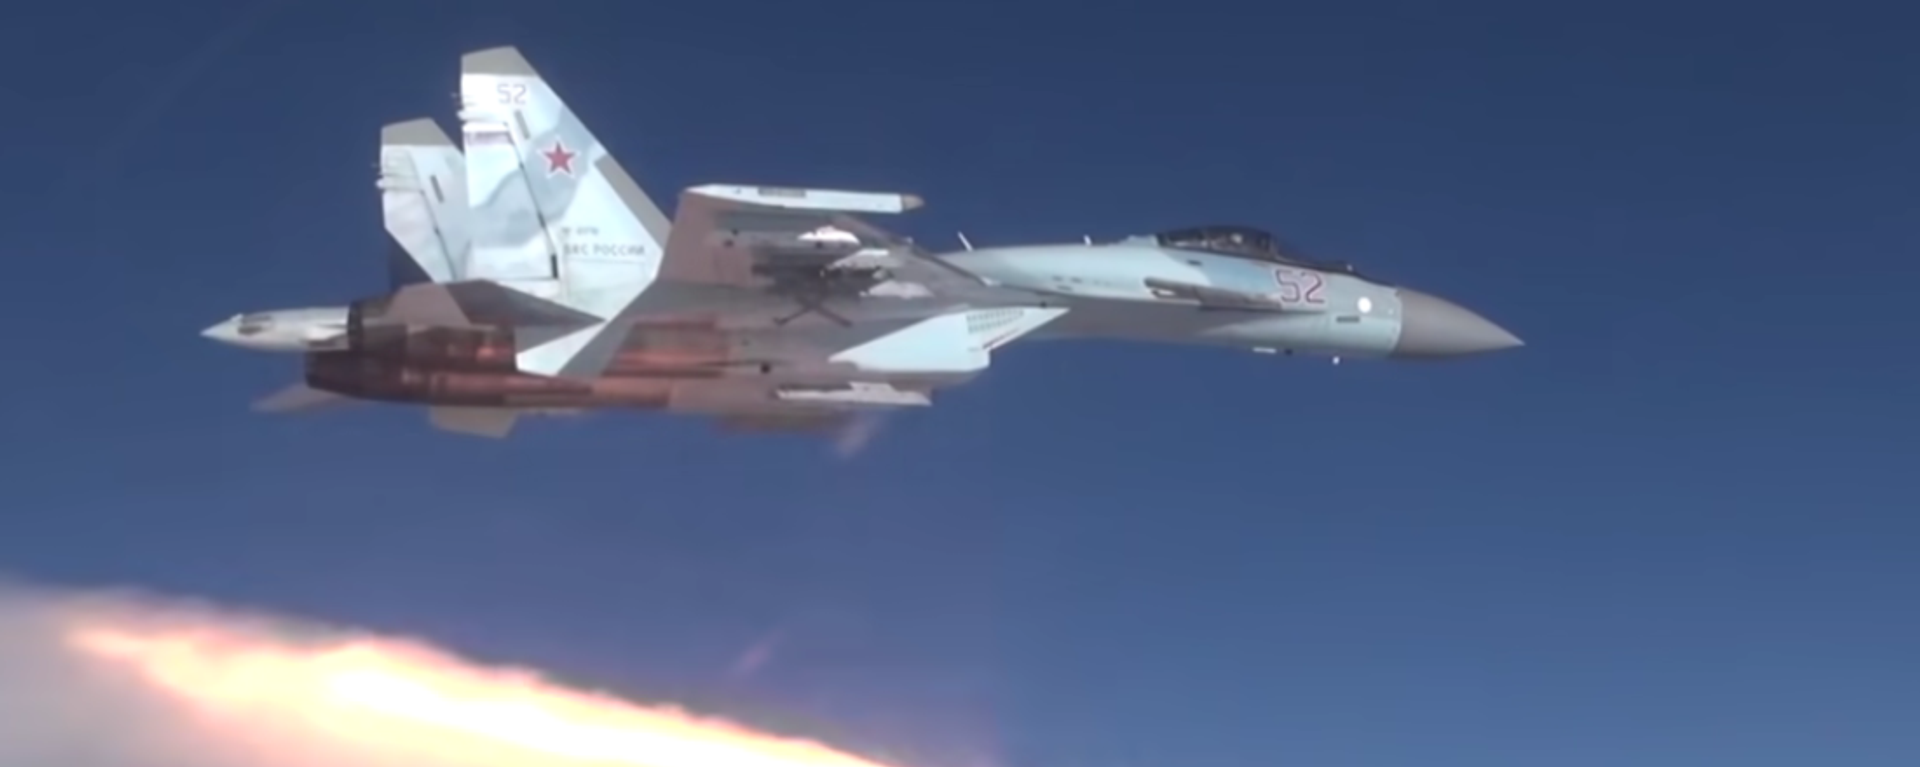 A Russian Su-35S fighter jet fires what appears to be an R-37M ultra-long-range air-to-air missile in a promotional video by the Russian Ministry of Defense - Sputnik International, 1920, 11.03.2023